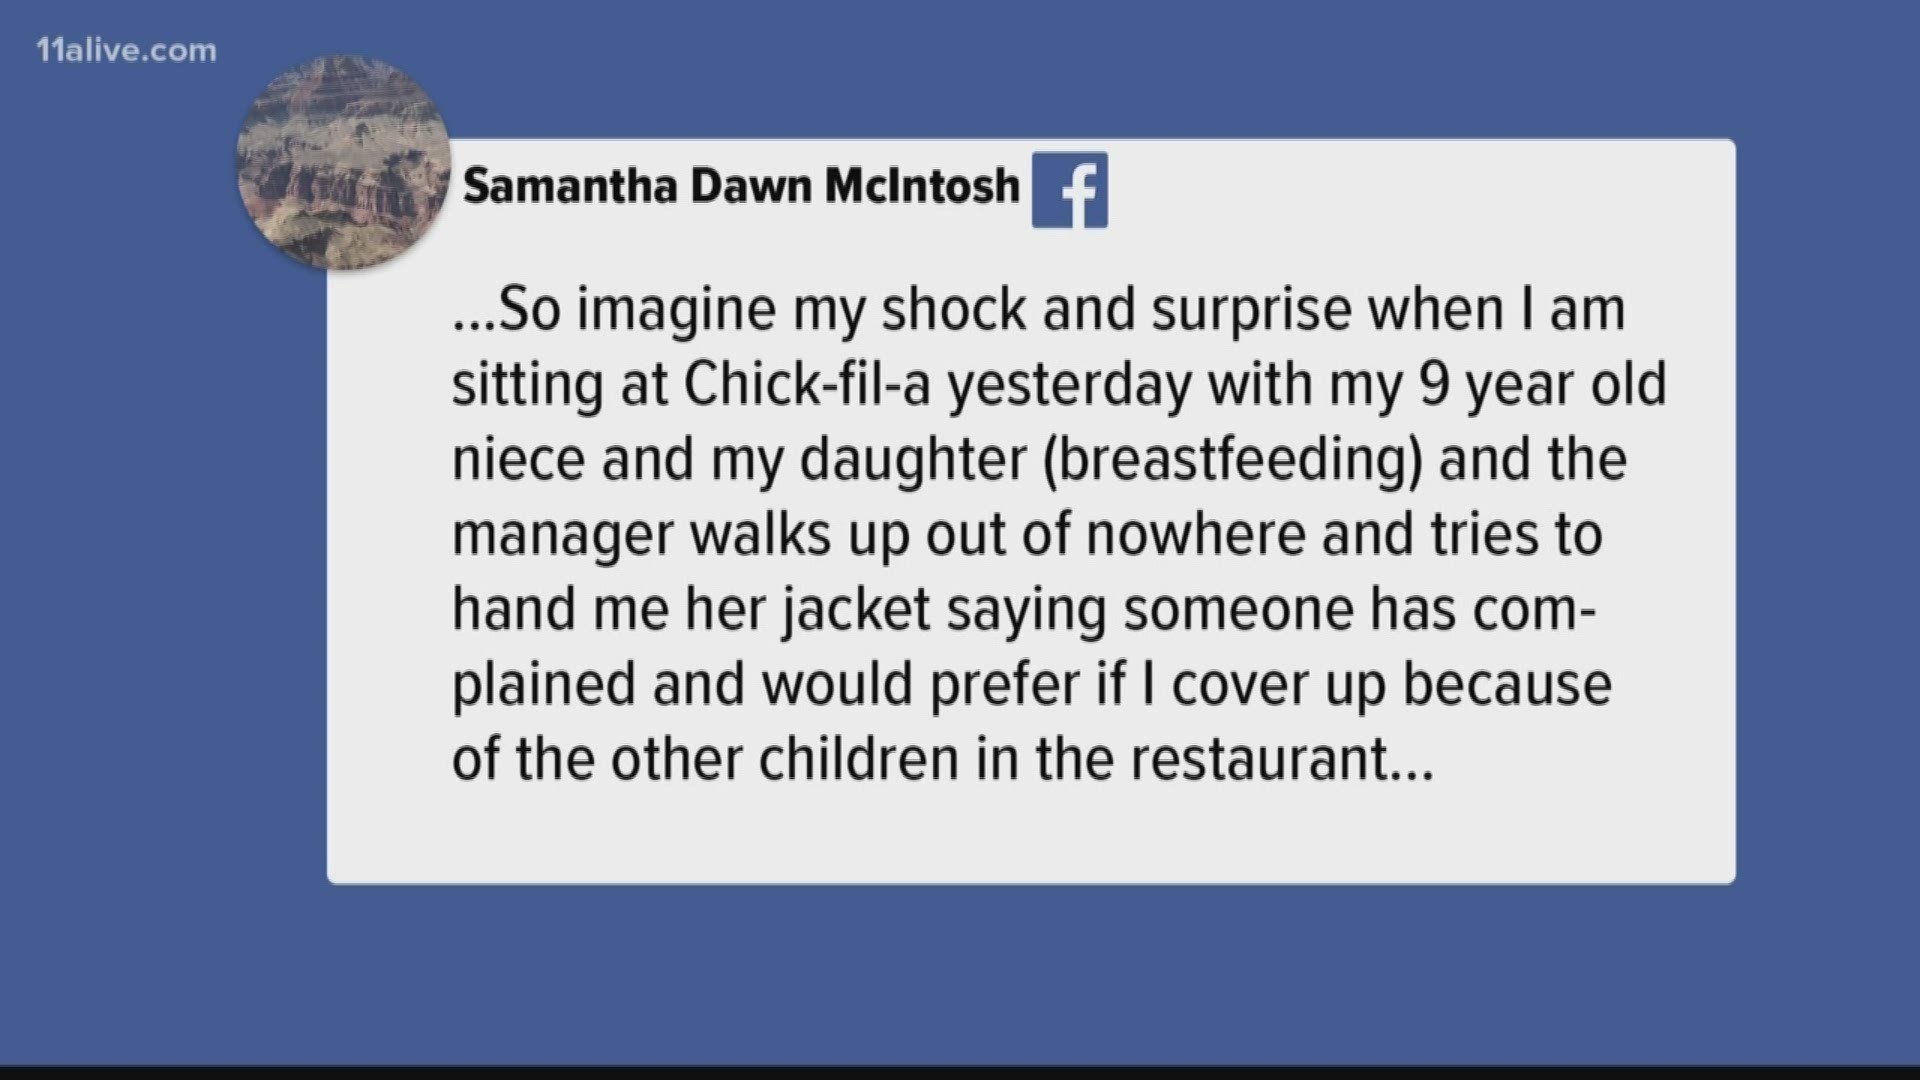 The manager handed her a jacket and asked her to "cover up" while breastfeeding